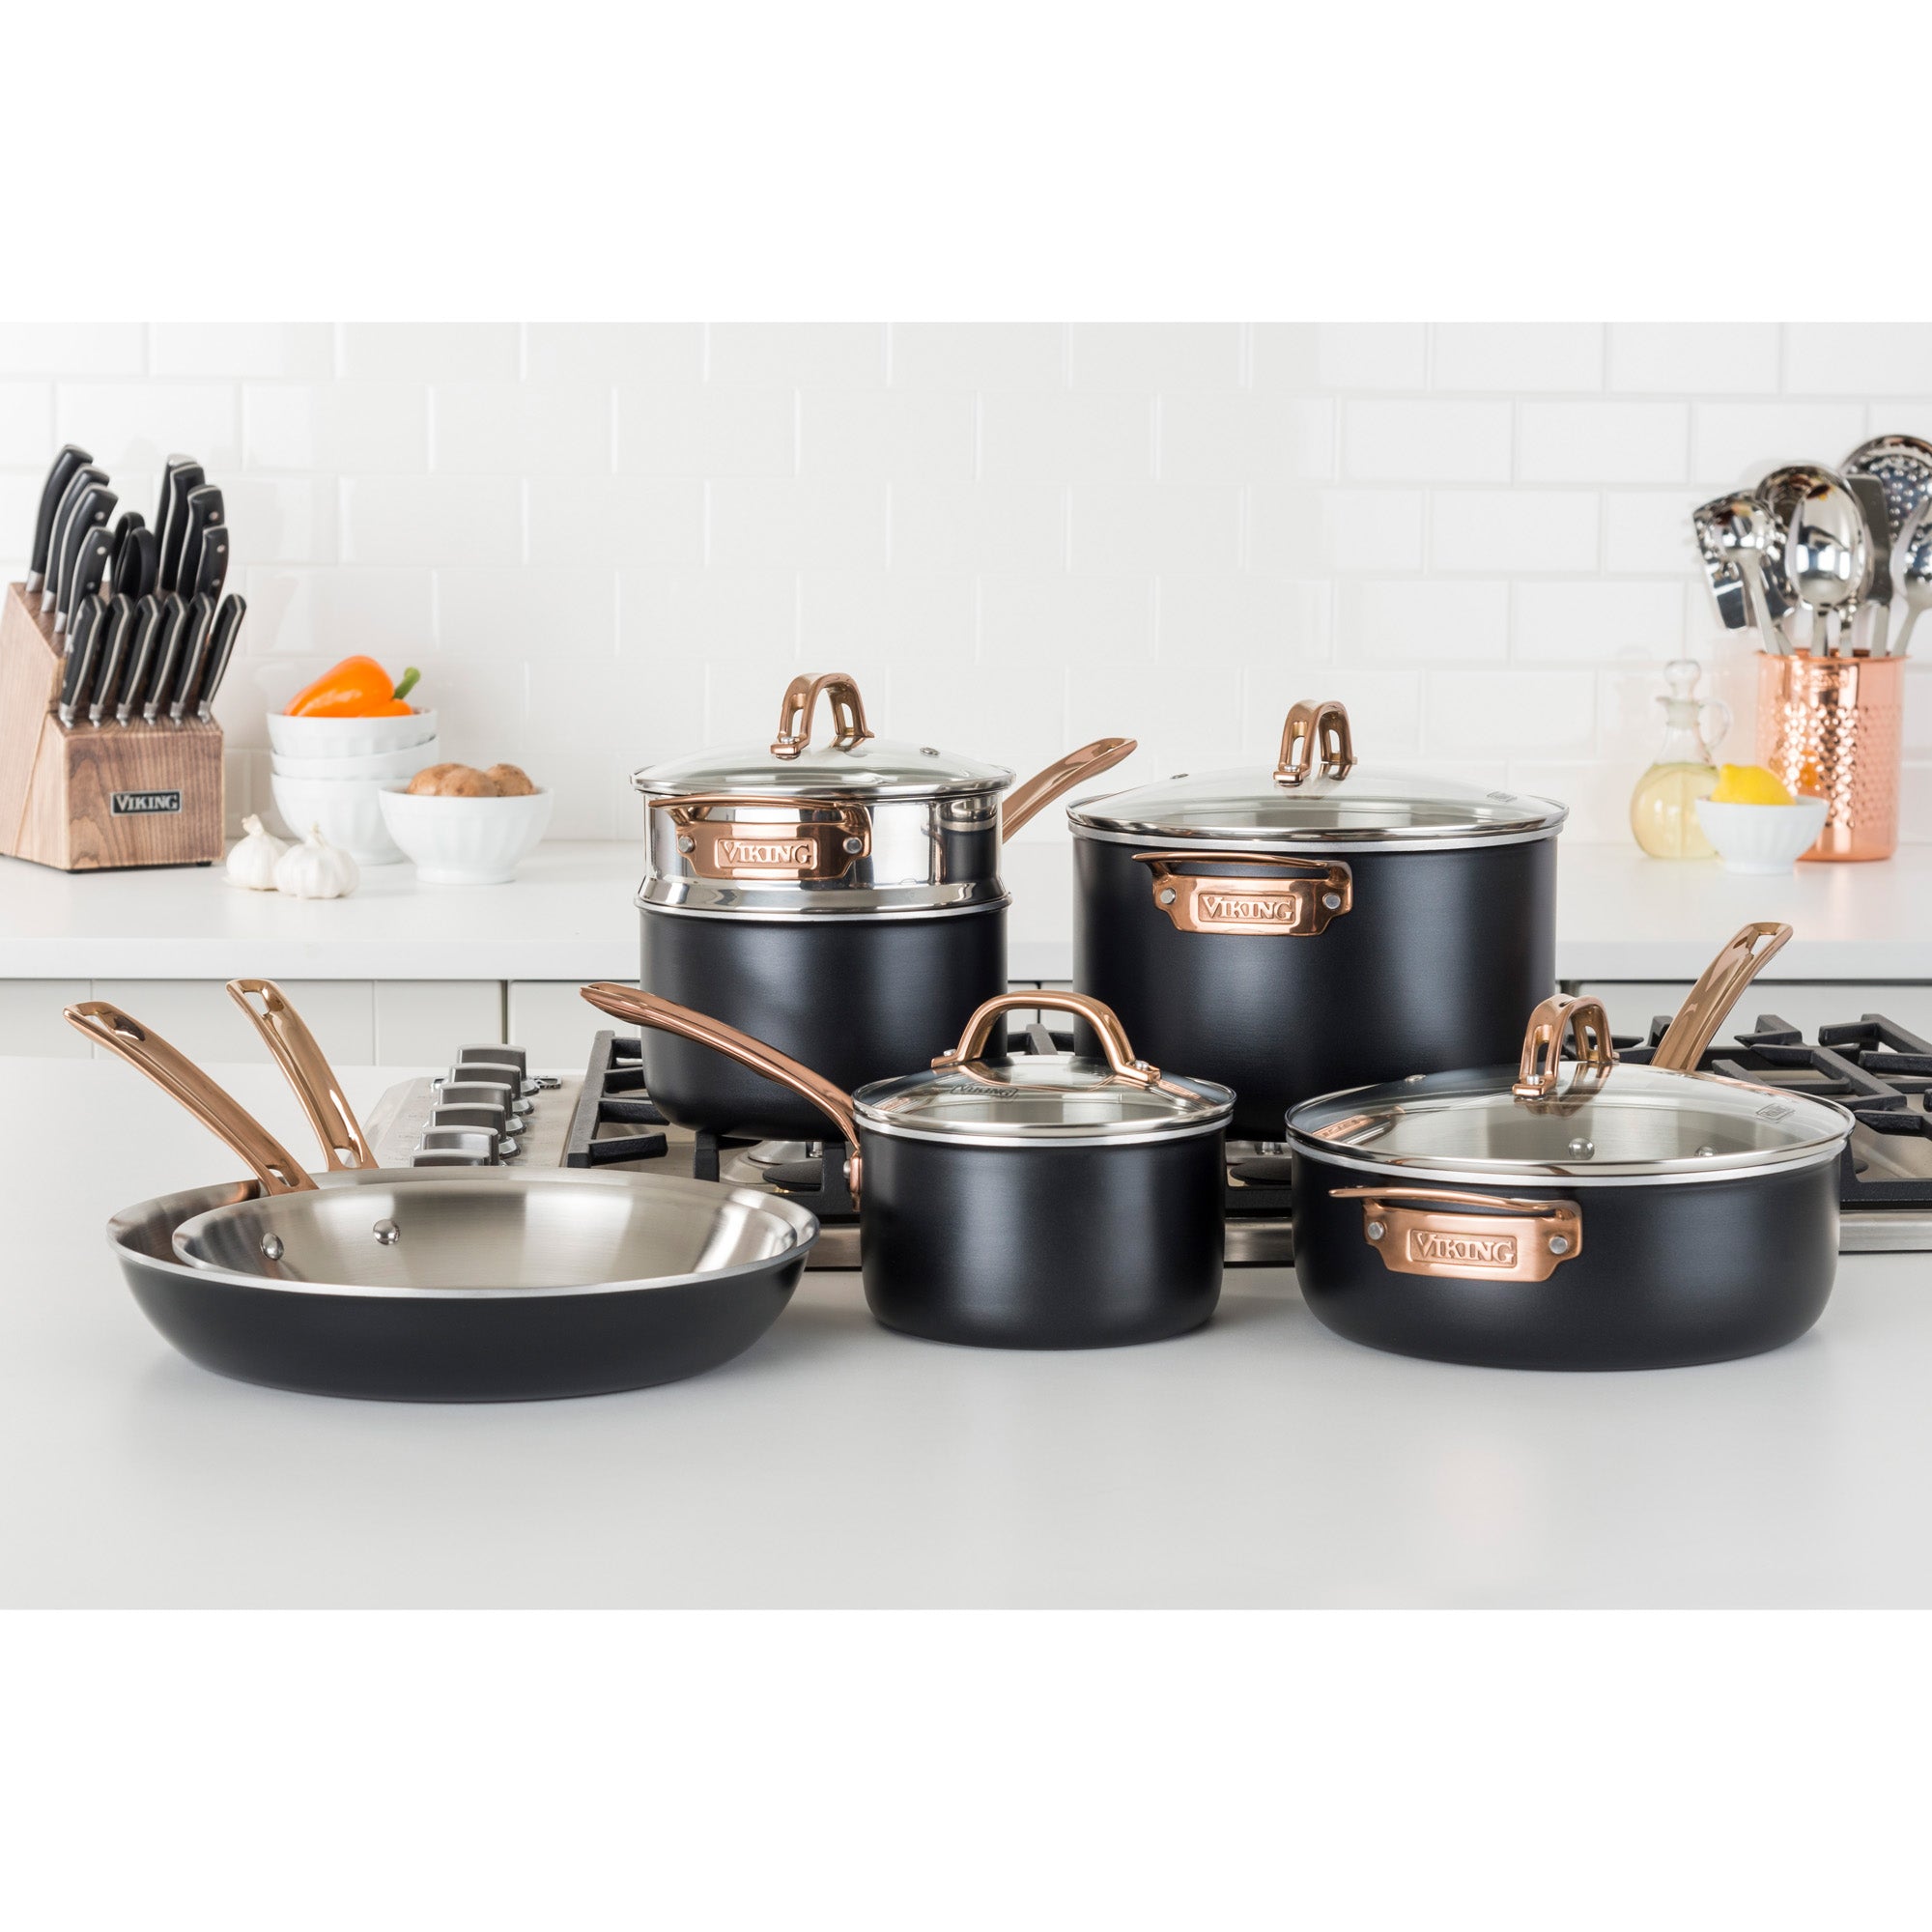 Viking 3-Ply 11 Piece Black and Copper Cookware Set with Glass